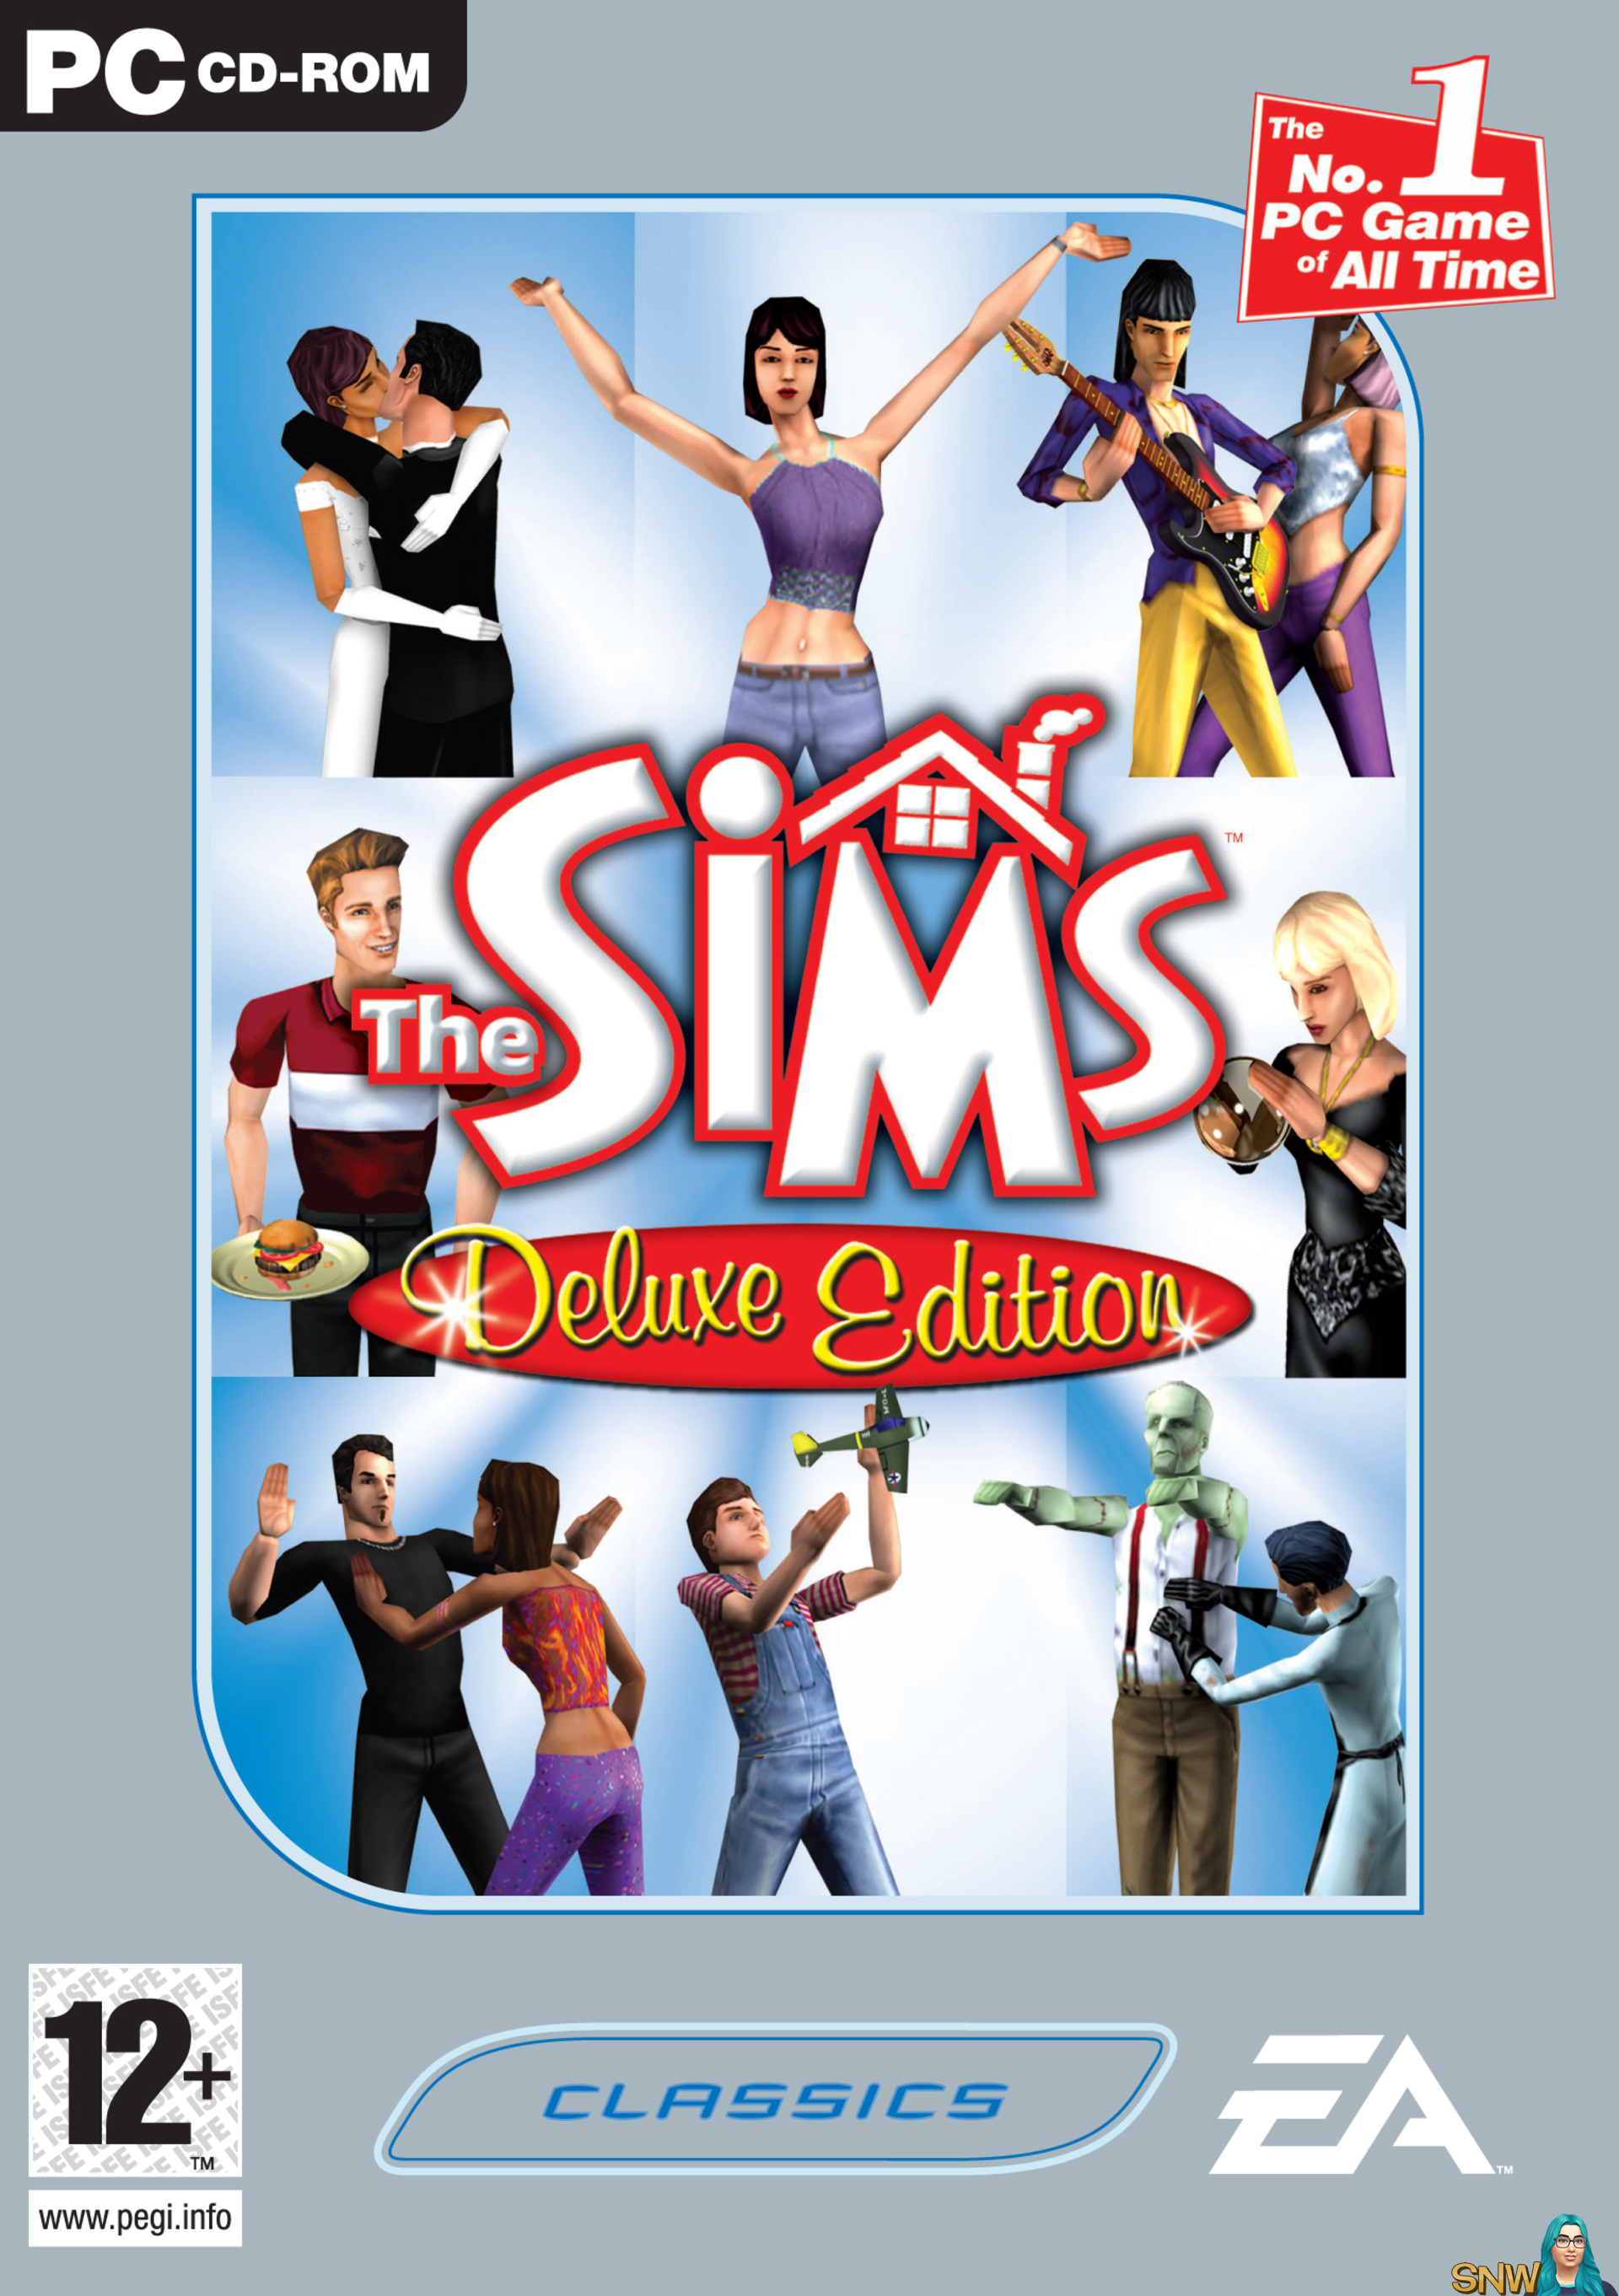 sims 3 deluxe edition includes